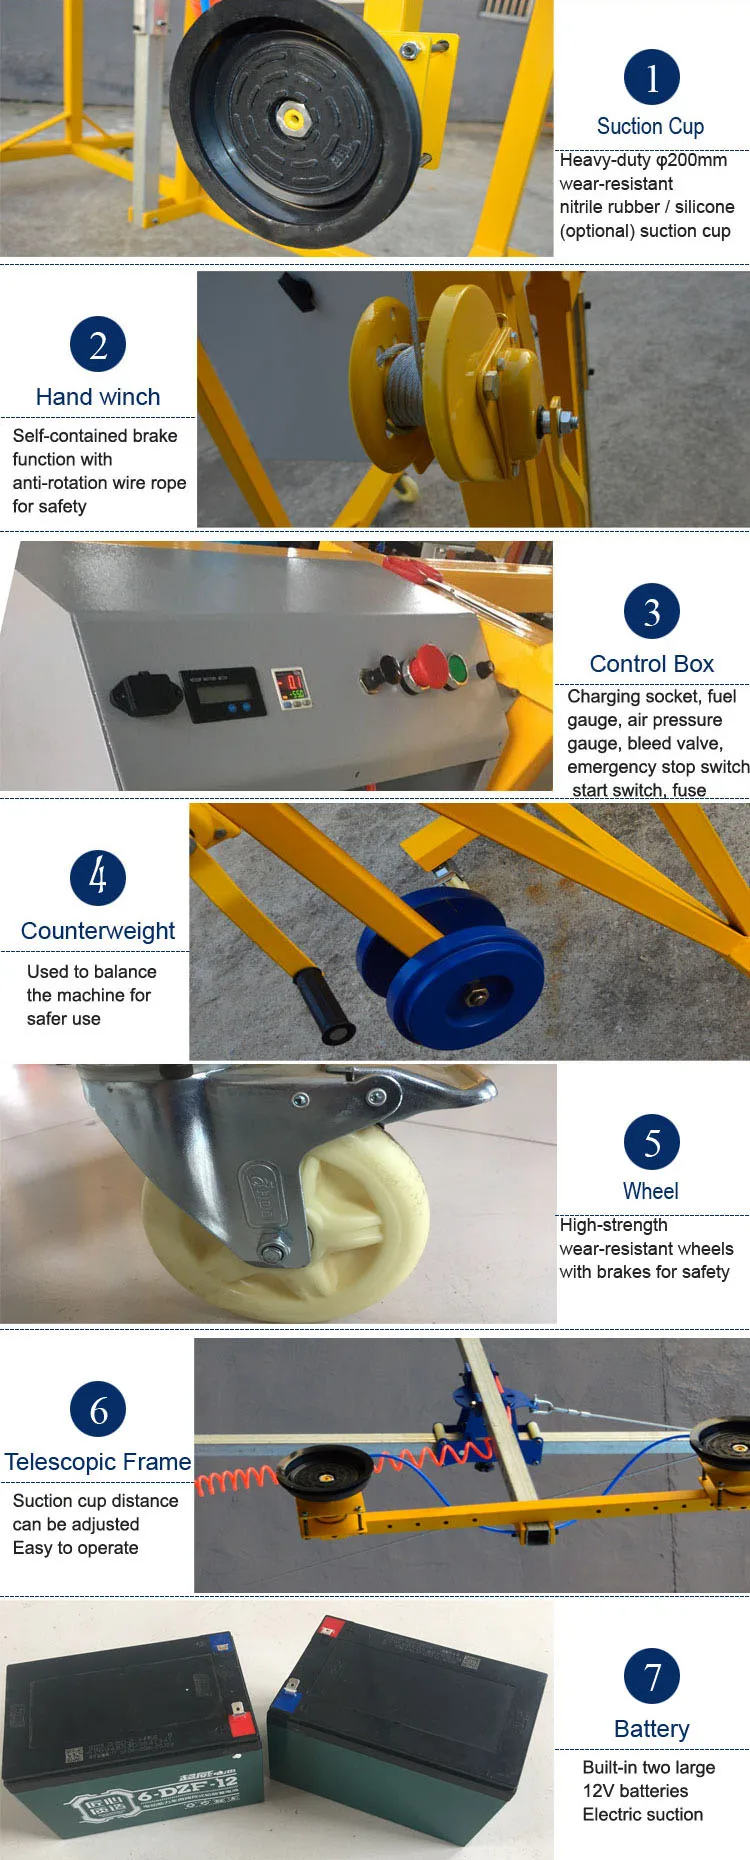 Moveable vacuum lifter for glass glazing, material handling